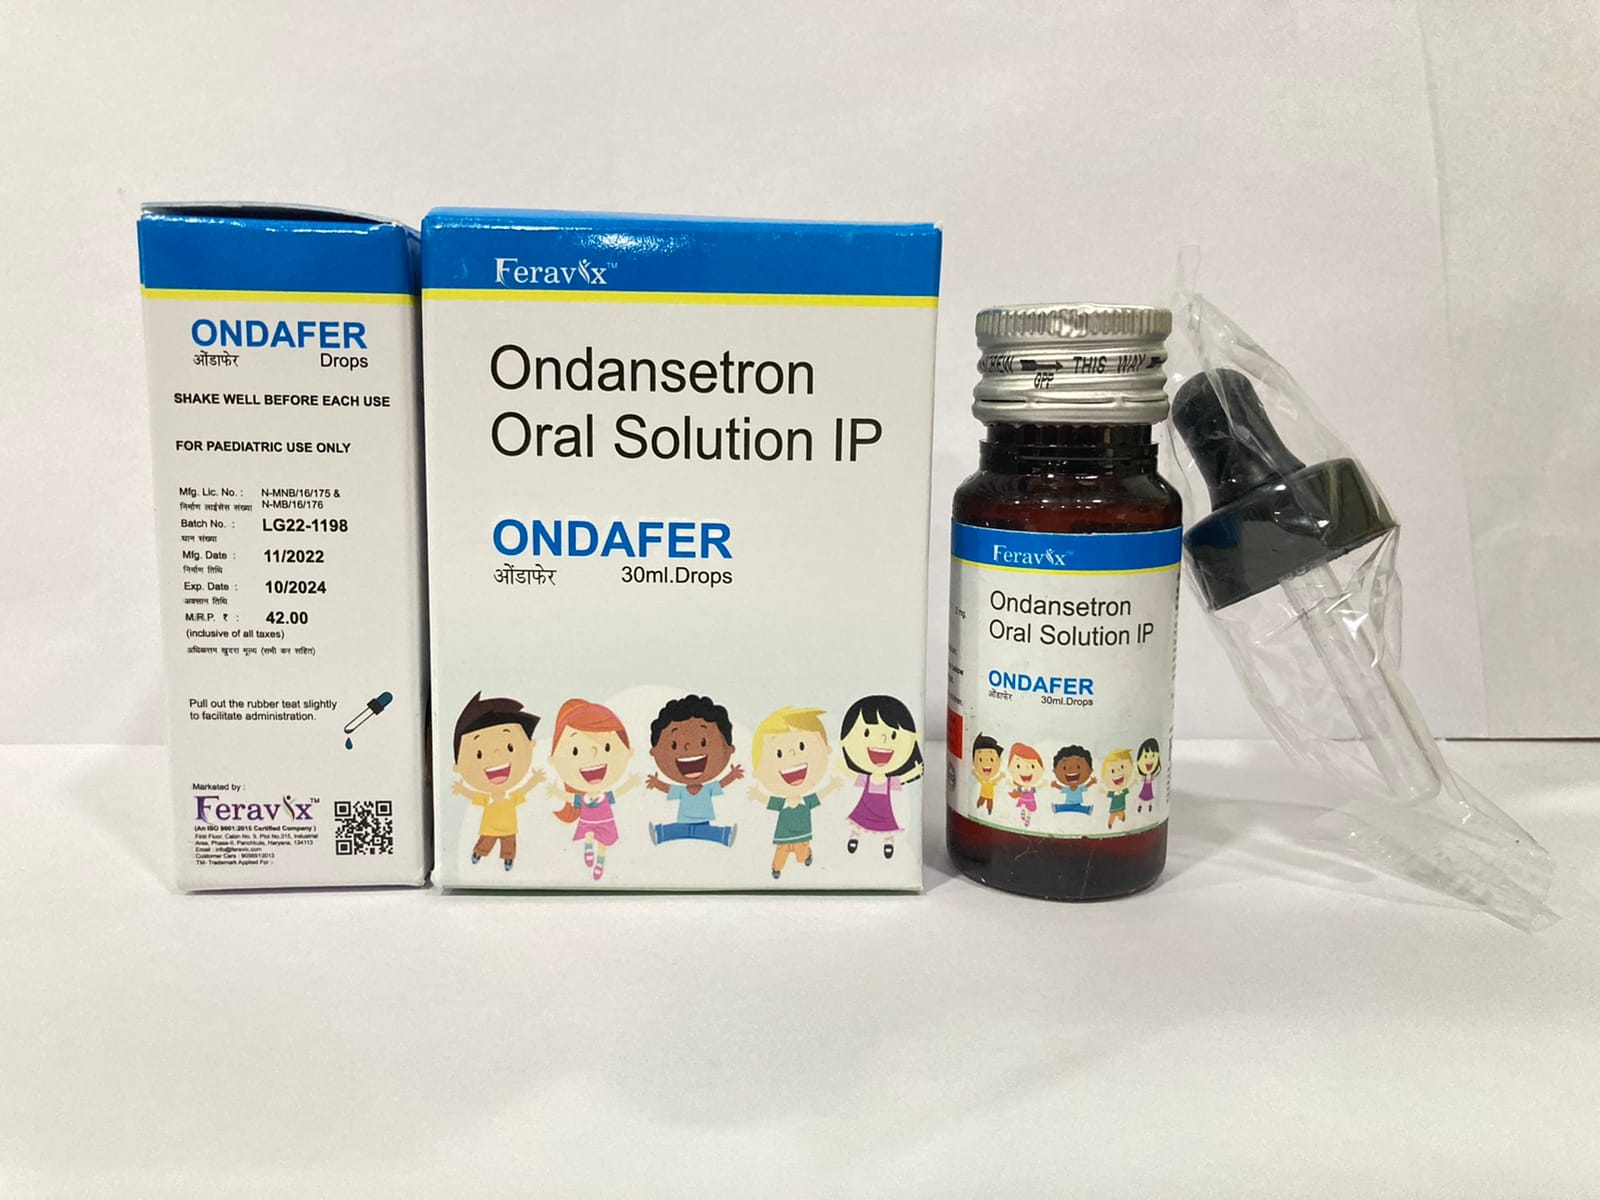 Product Name: ONDAFER Syrup, Compositions of ONDAFER Syrup are ONDANSETRON HYDROCHLORIDE EQ. TO ONDANSETRON IP 2 MG - Feravix Lifesciences